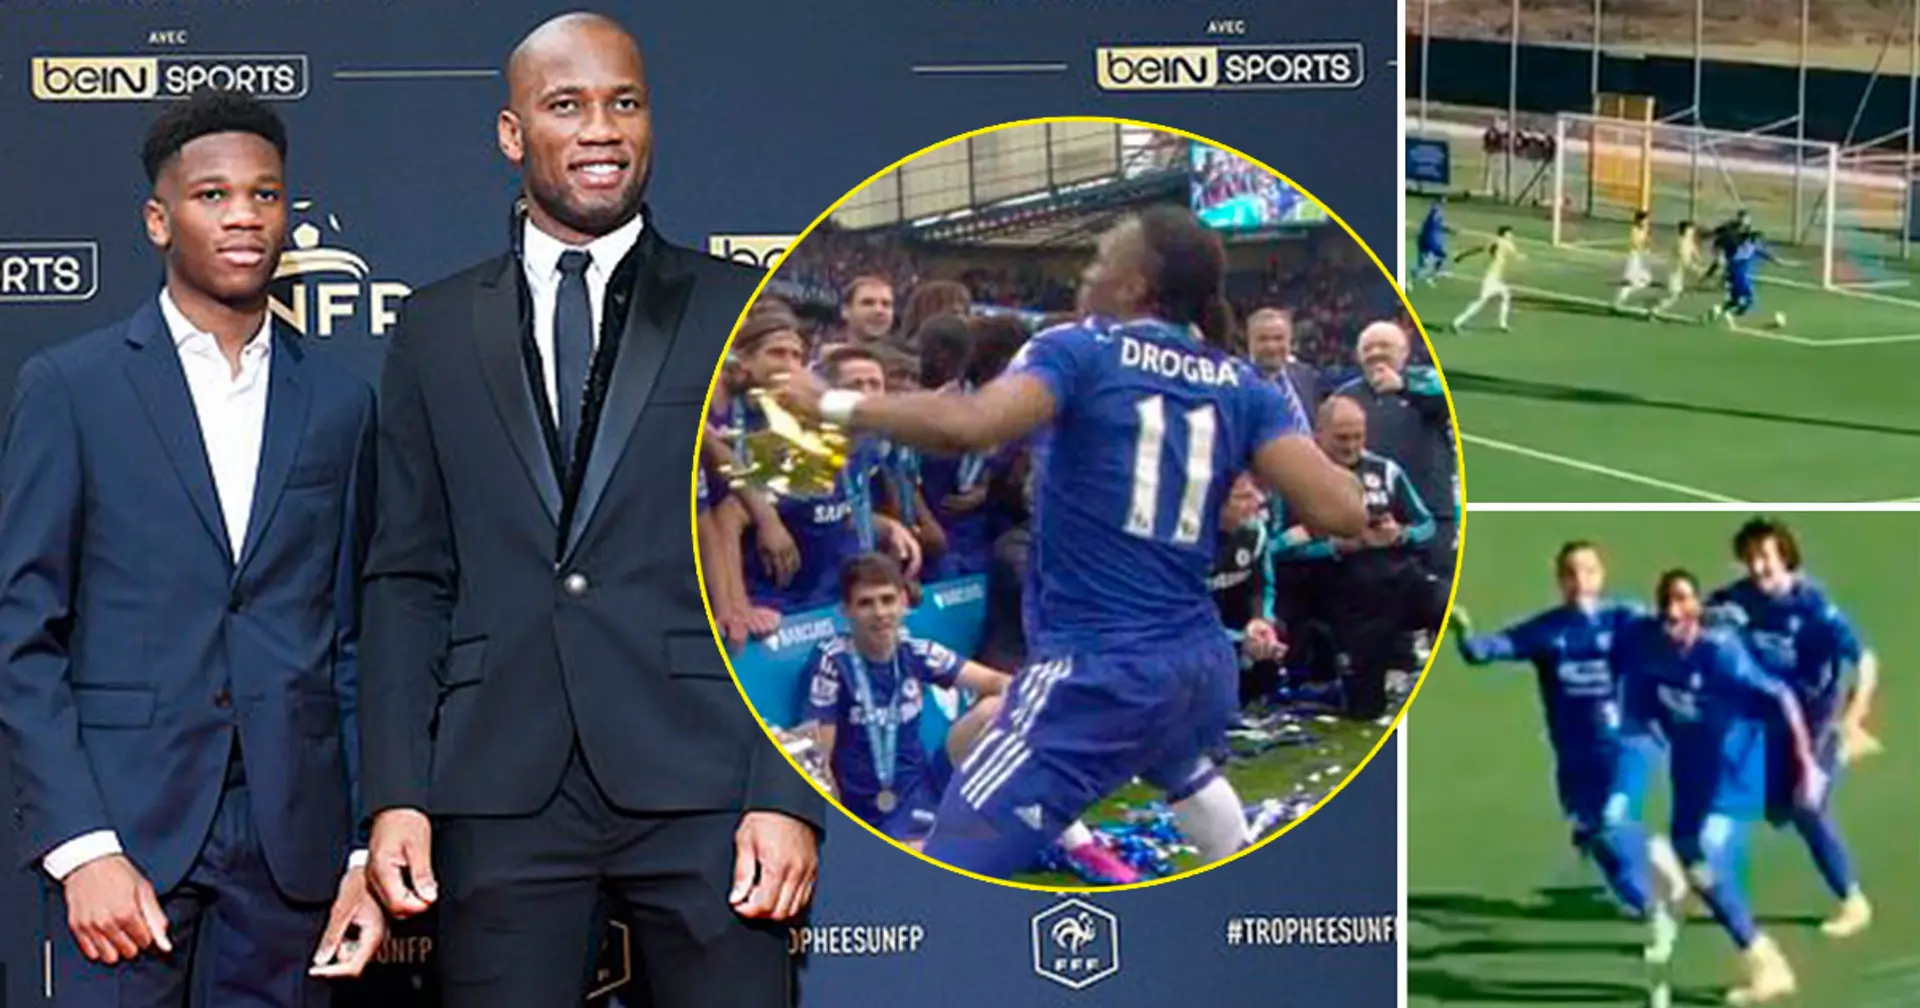 Drogba’s son scores first career goal in his dad's style and celebrates just like dad